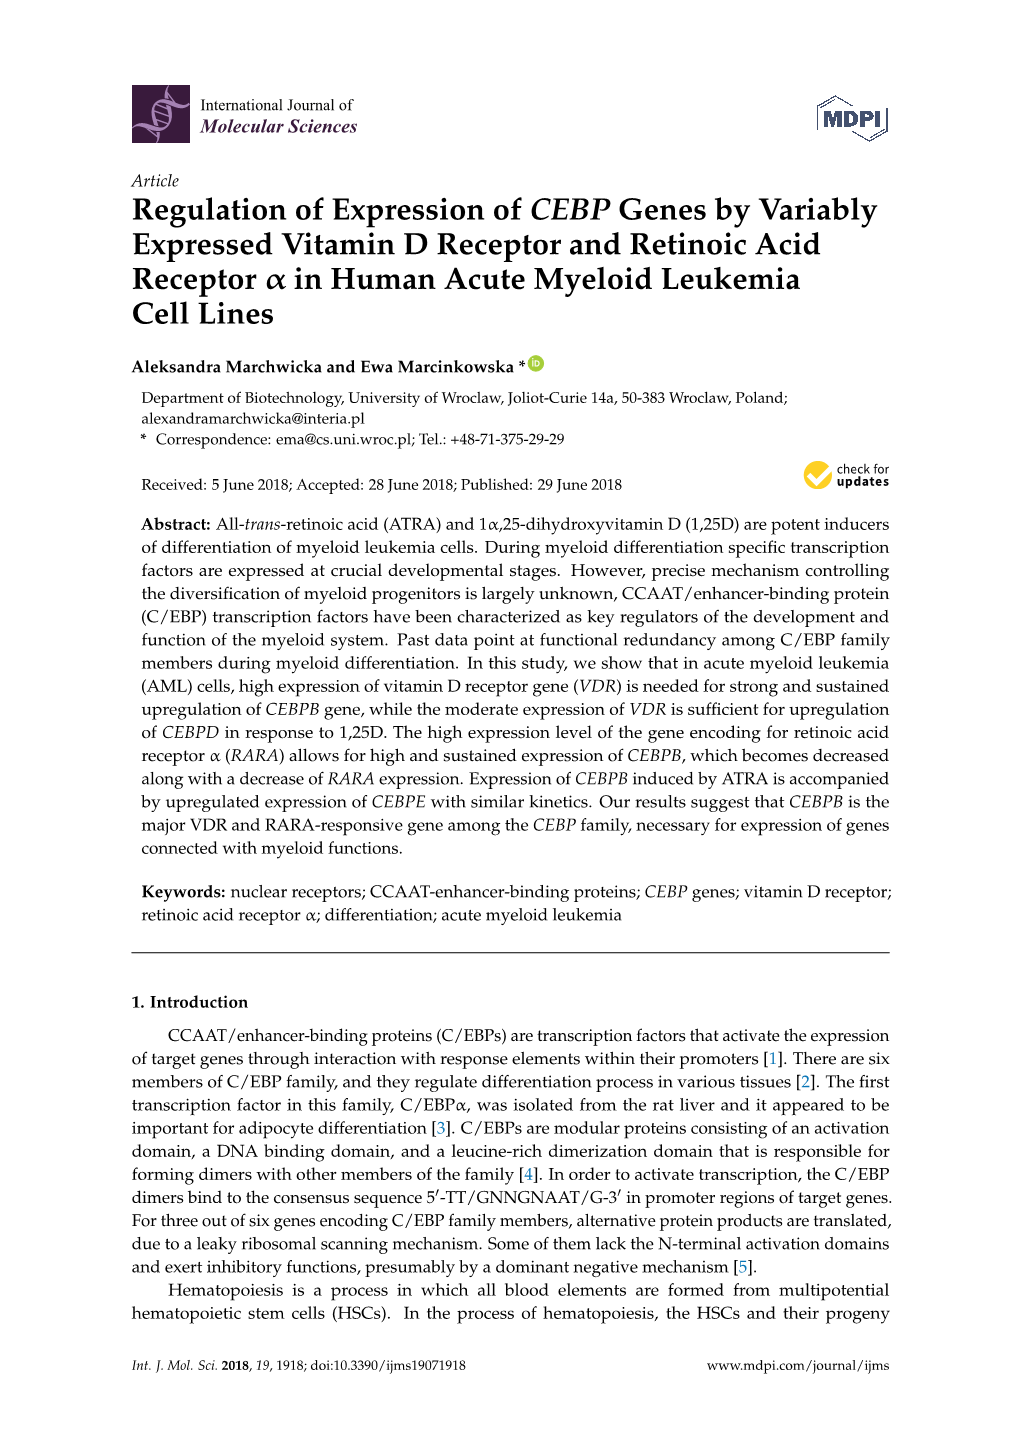 Regulation of Expression of CEBP Genes by Variably Expressed Vitamin D Receptor and Retinoic Acid Receptor Α in Human Acute Myeloid Leukemia Cell Lines